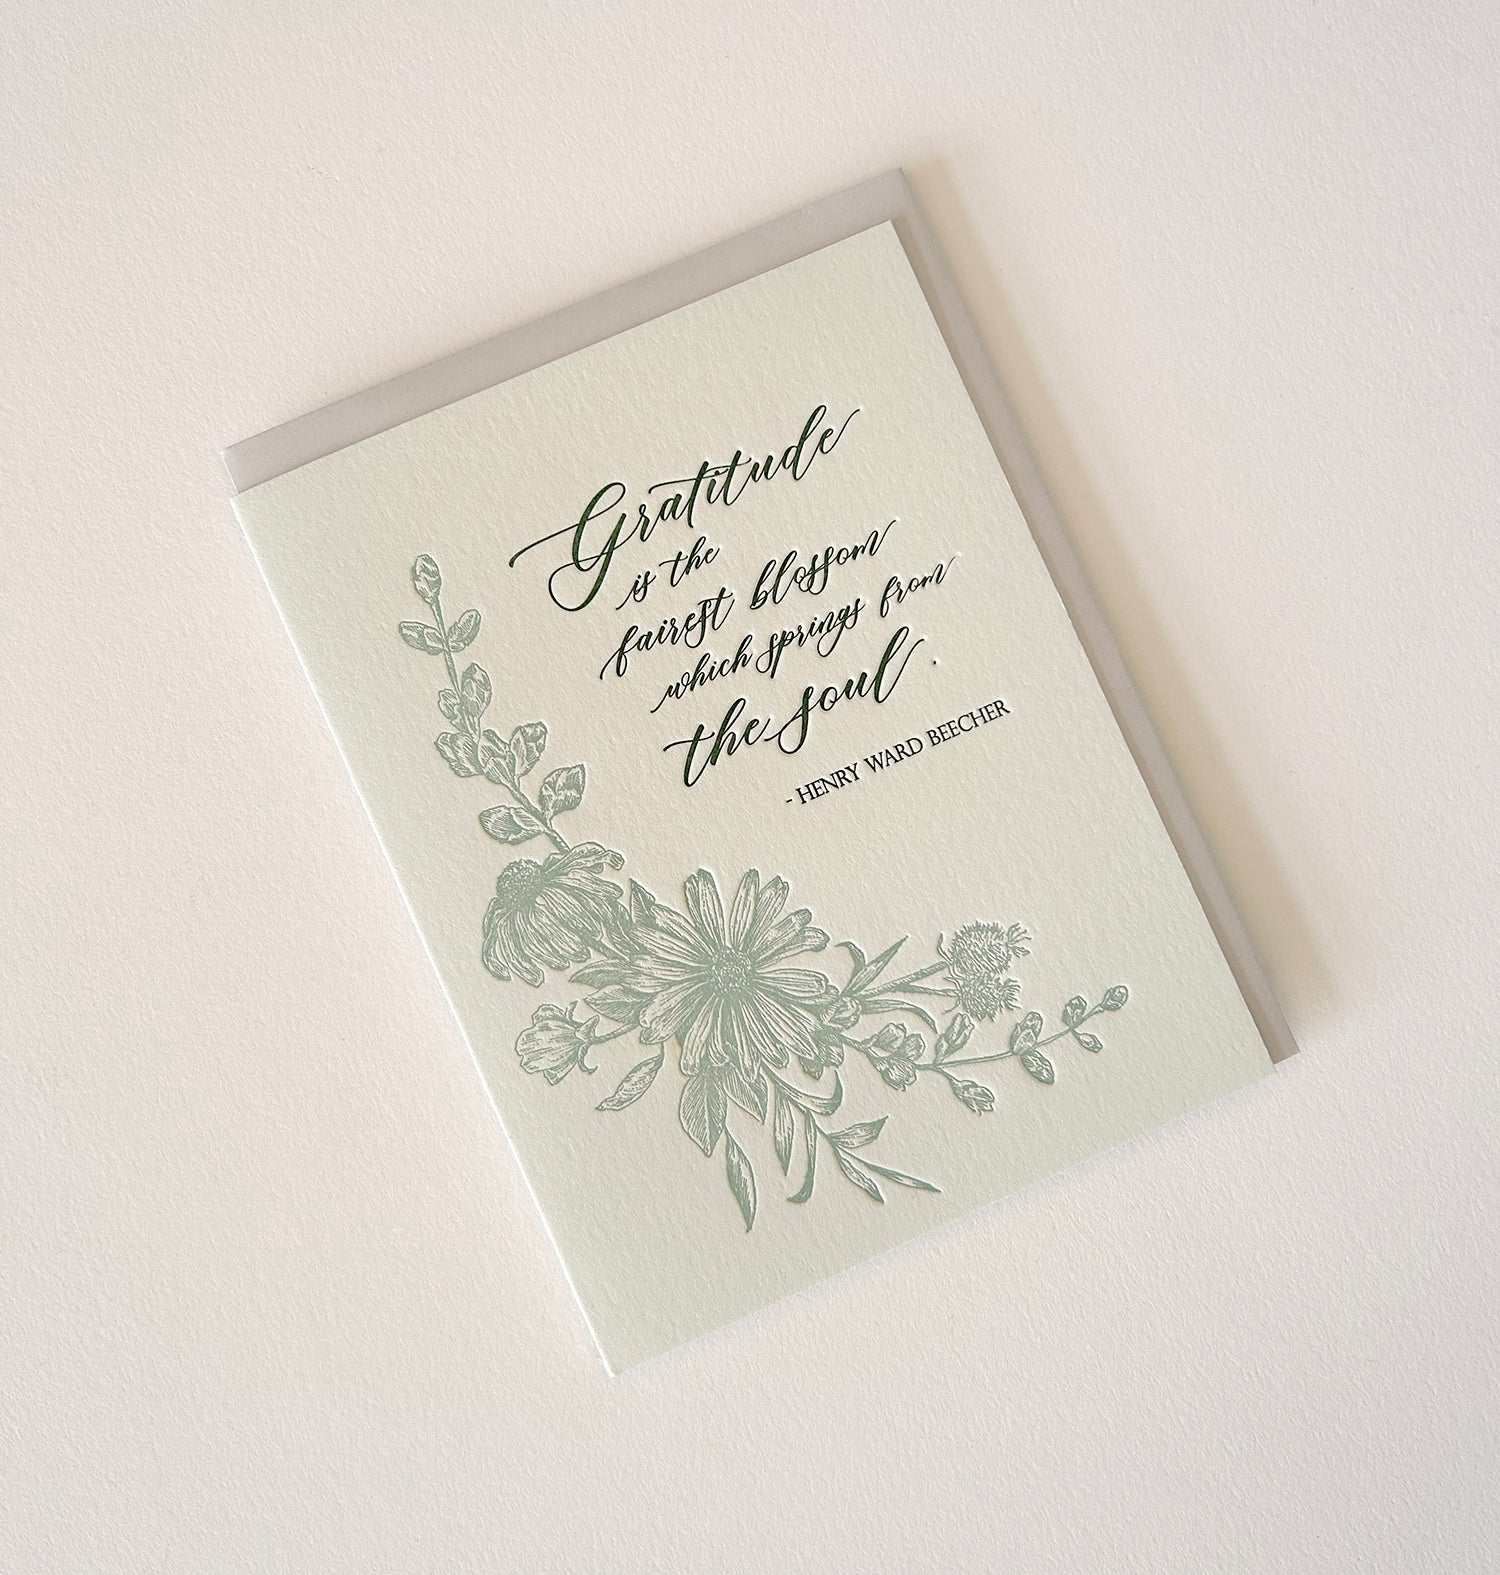 Letterpress gratitude card with florals that says "'Gratitude is the fairest blossom which springs from the soul.'- Henry Ward Beecher" by Rust Belt Love